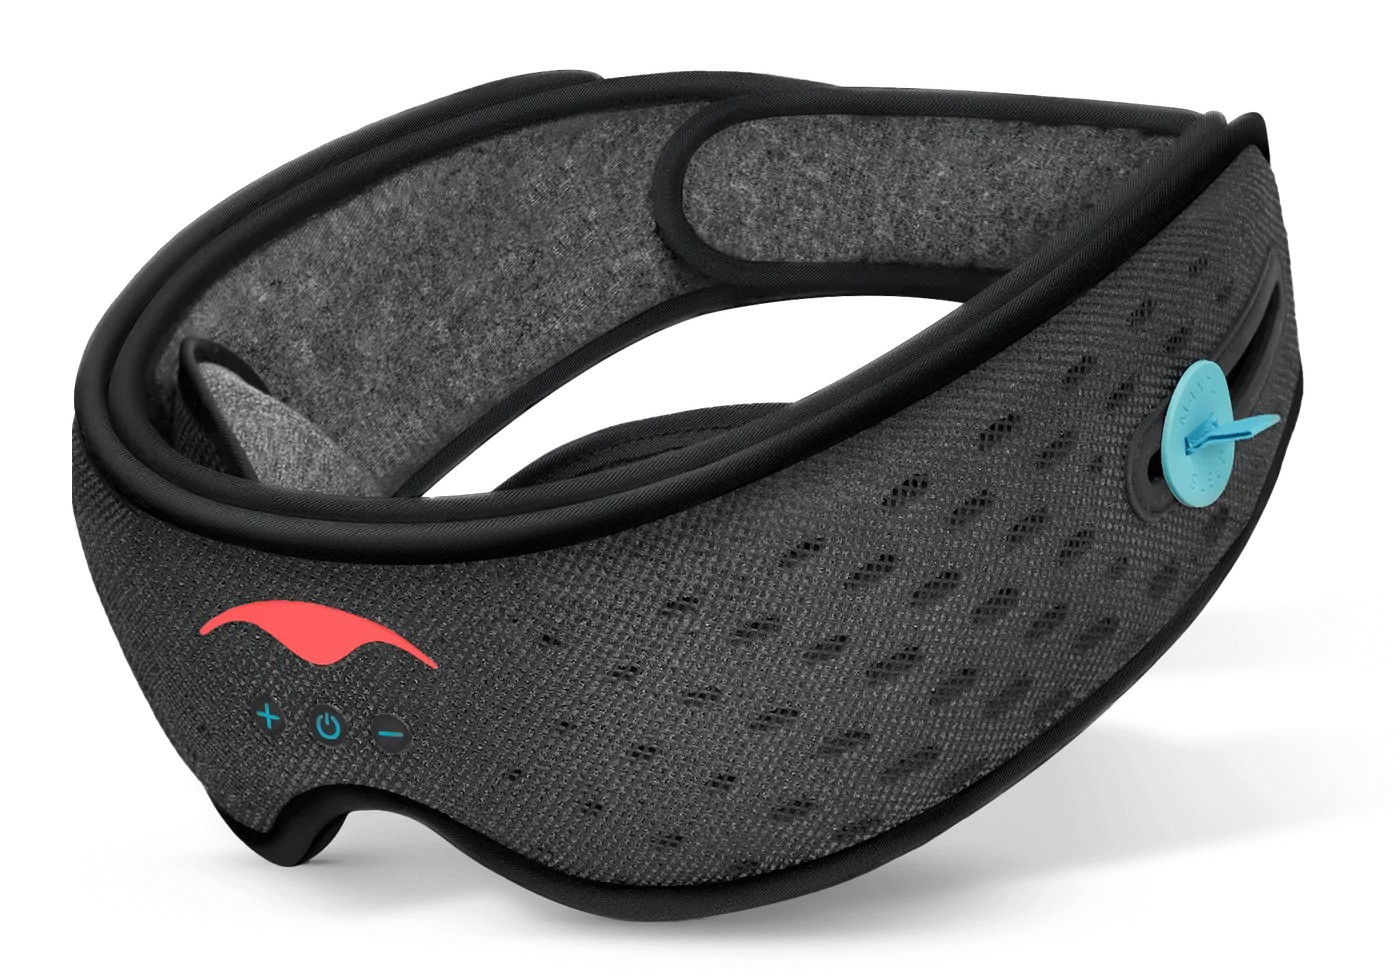 A black mesh sleep mask with Bluetooth speakers and eye cups.